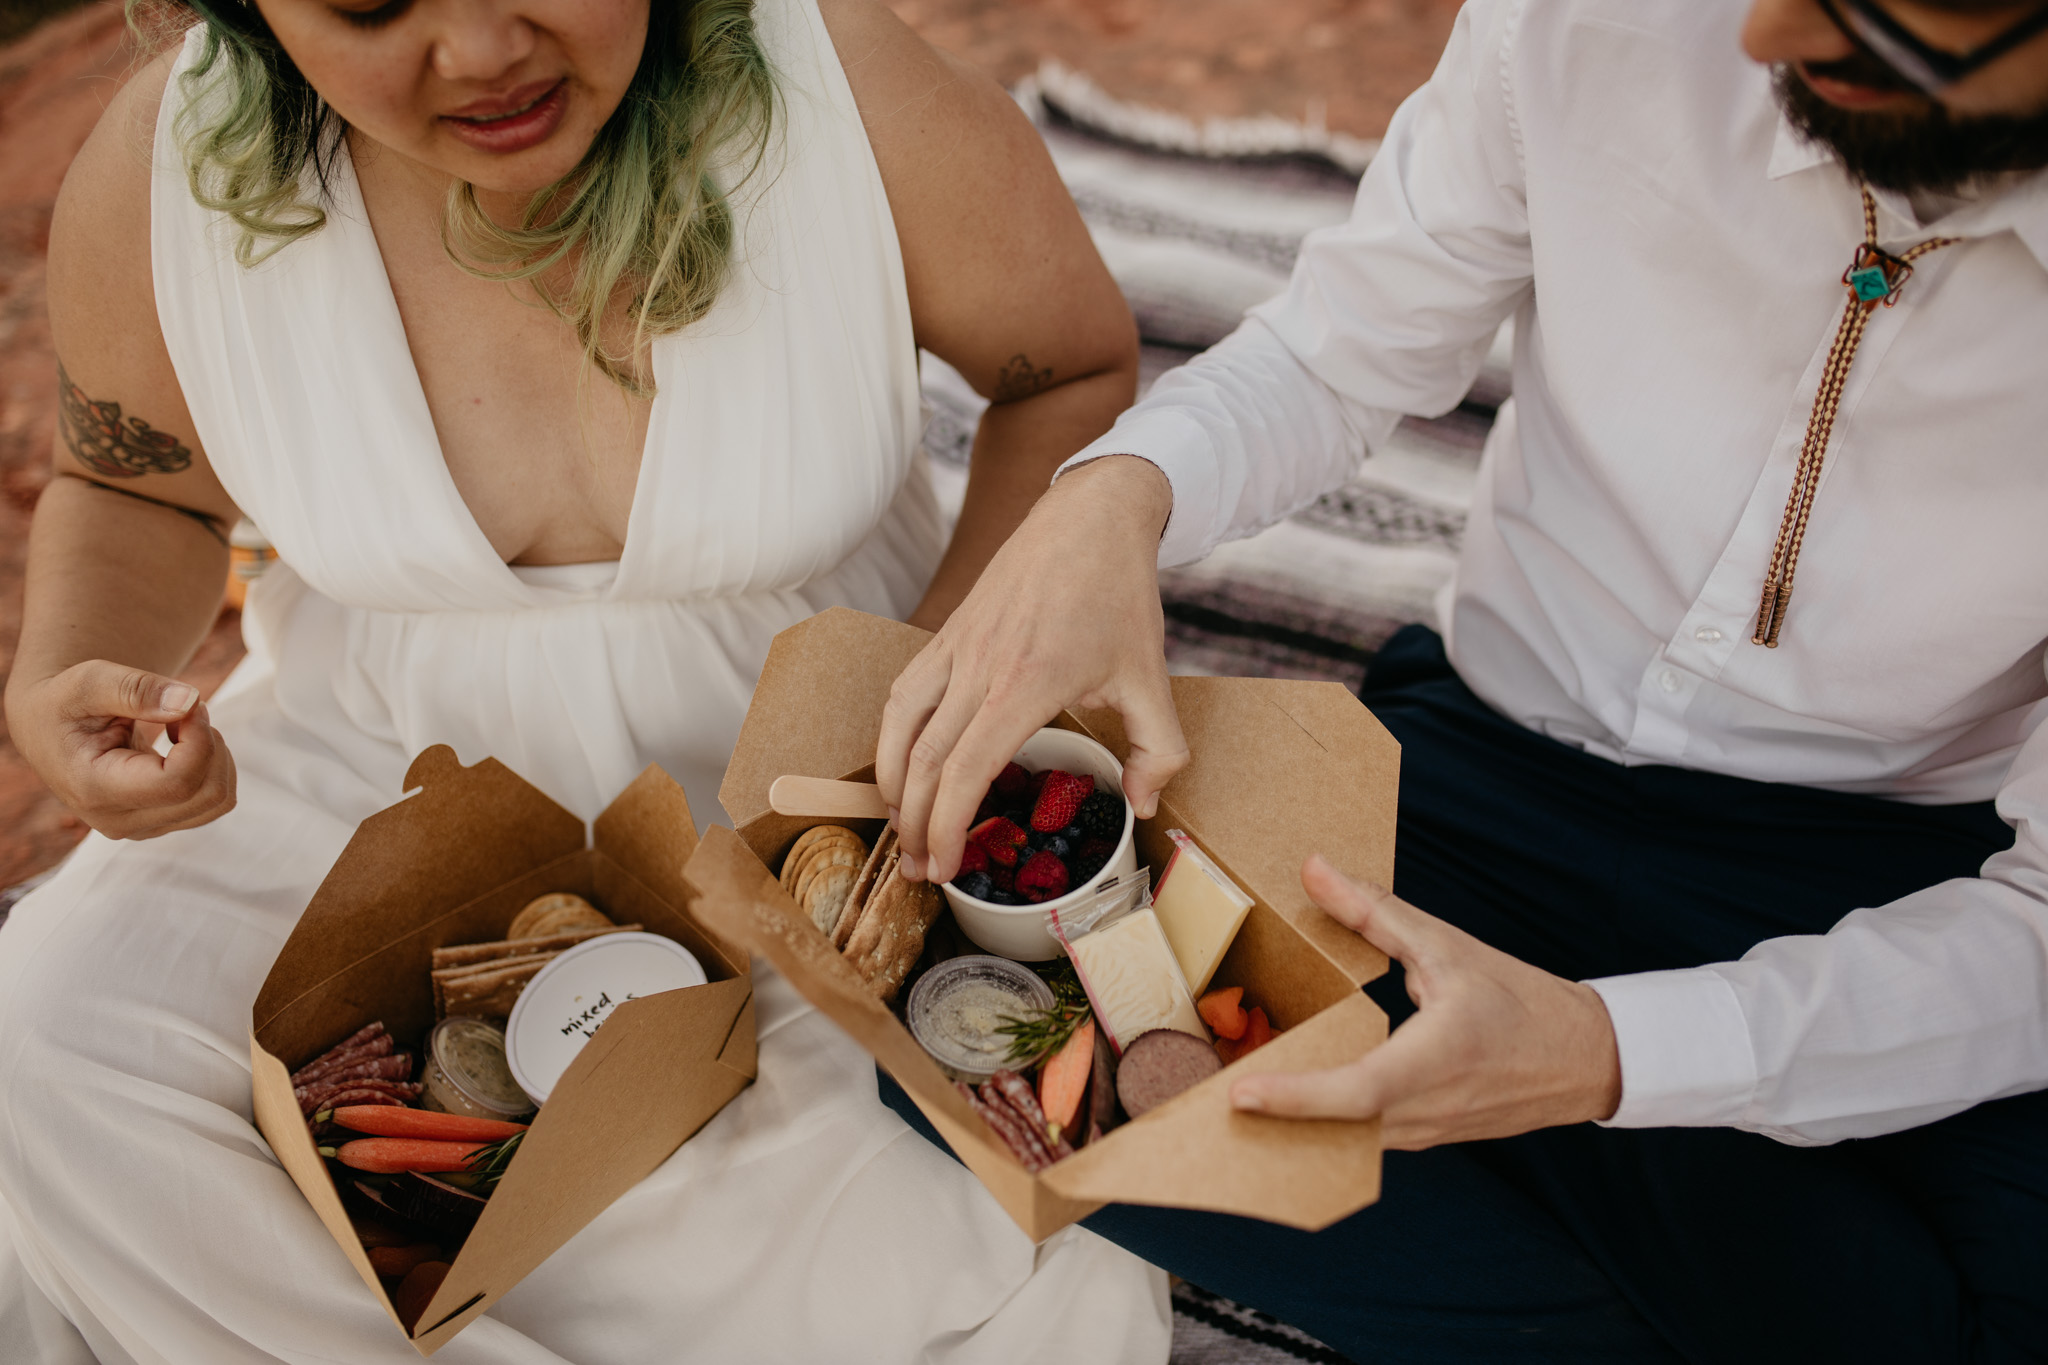 Sunset Sedona Elopement - A picnic in the red rocks of Arizona